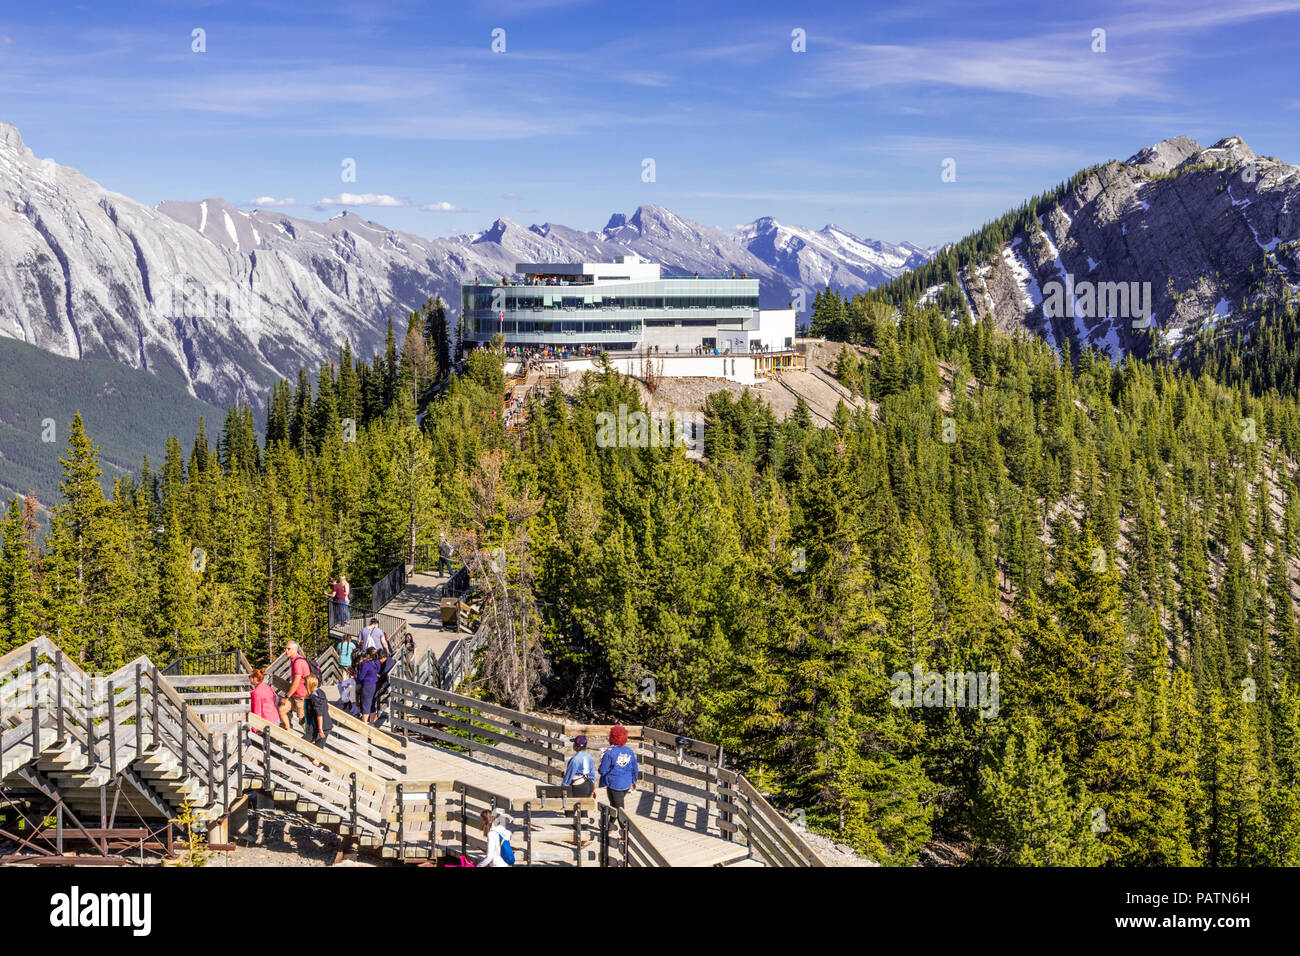 The summit building and boardwalk on Sulphur Mountain in the Rocky Mountains, Banff, Alberta, Canada Stock Photo